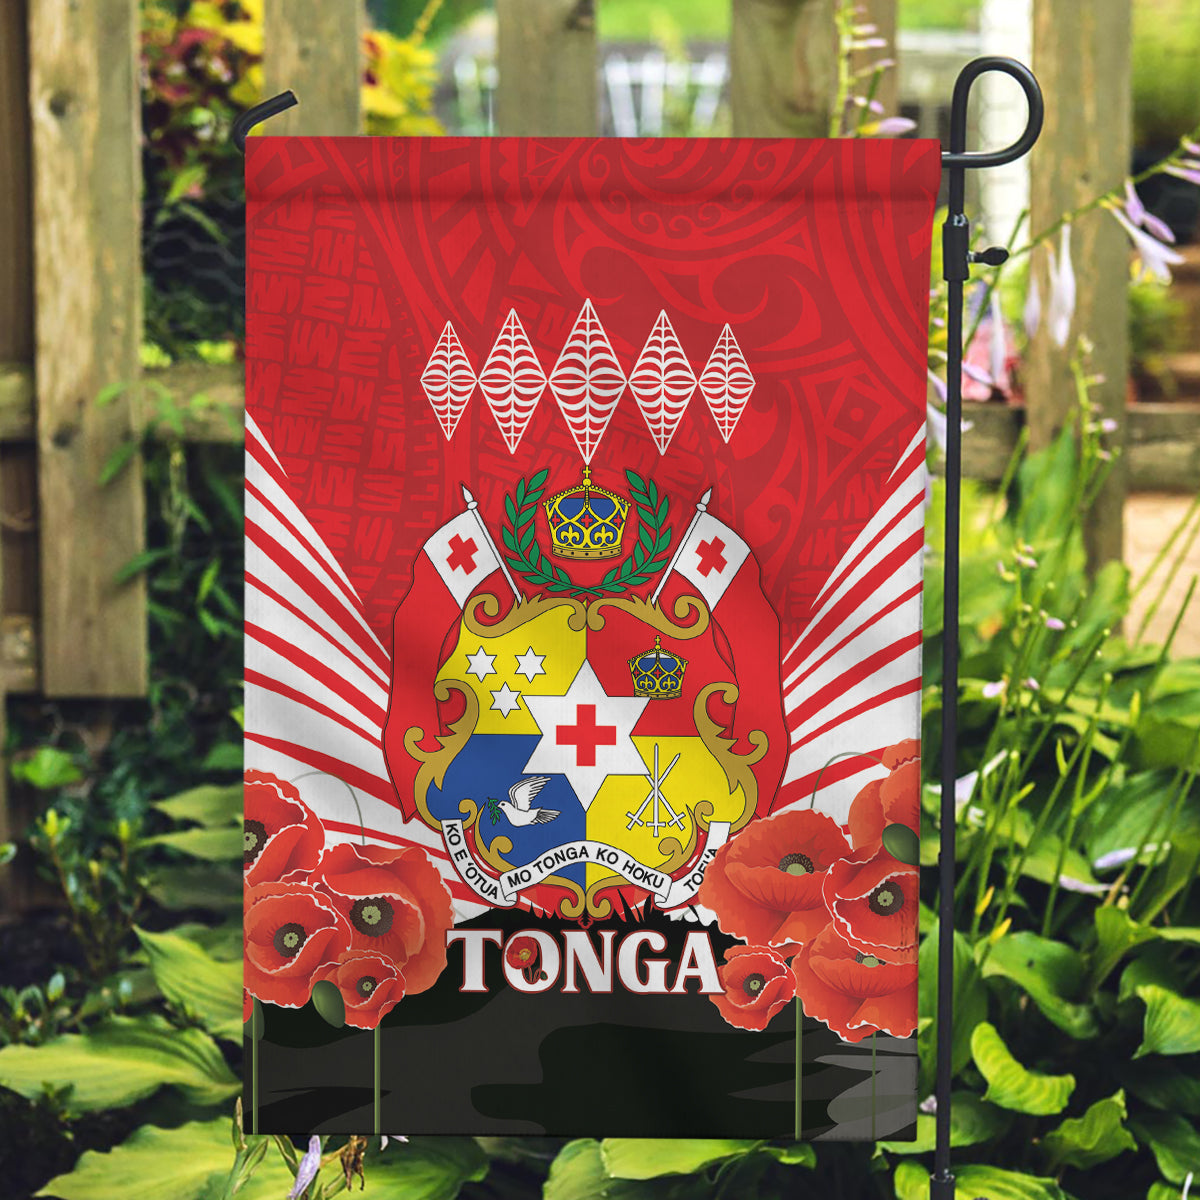 Tonga ANZAC Day Garden Flag Camouflage With Poppies Lest We Forget LT14 Garden Flag Red - Polynesian Pride